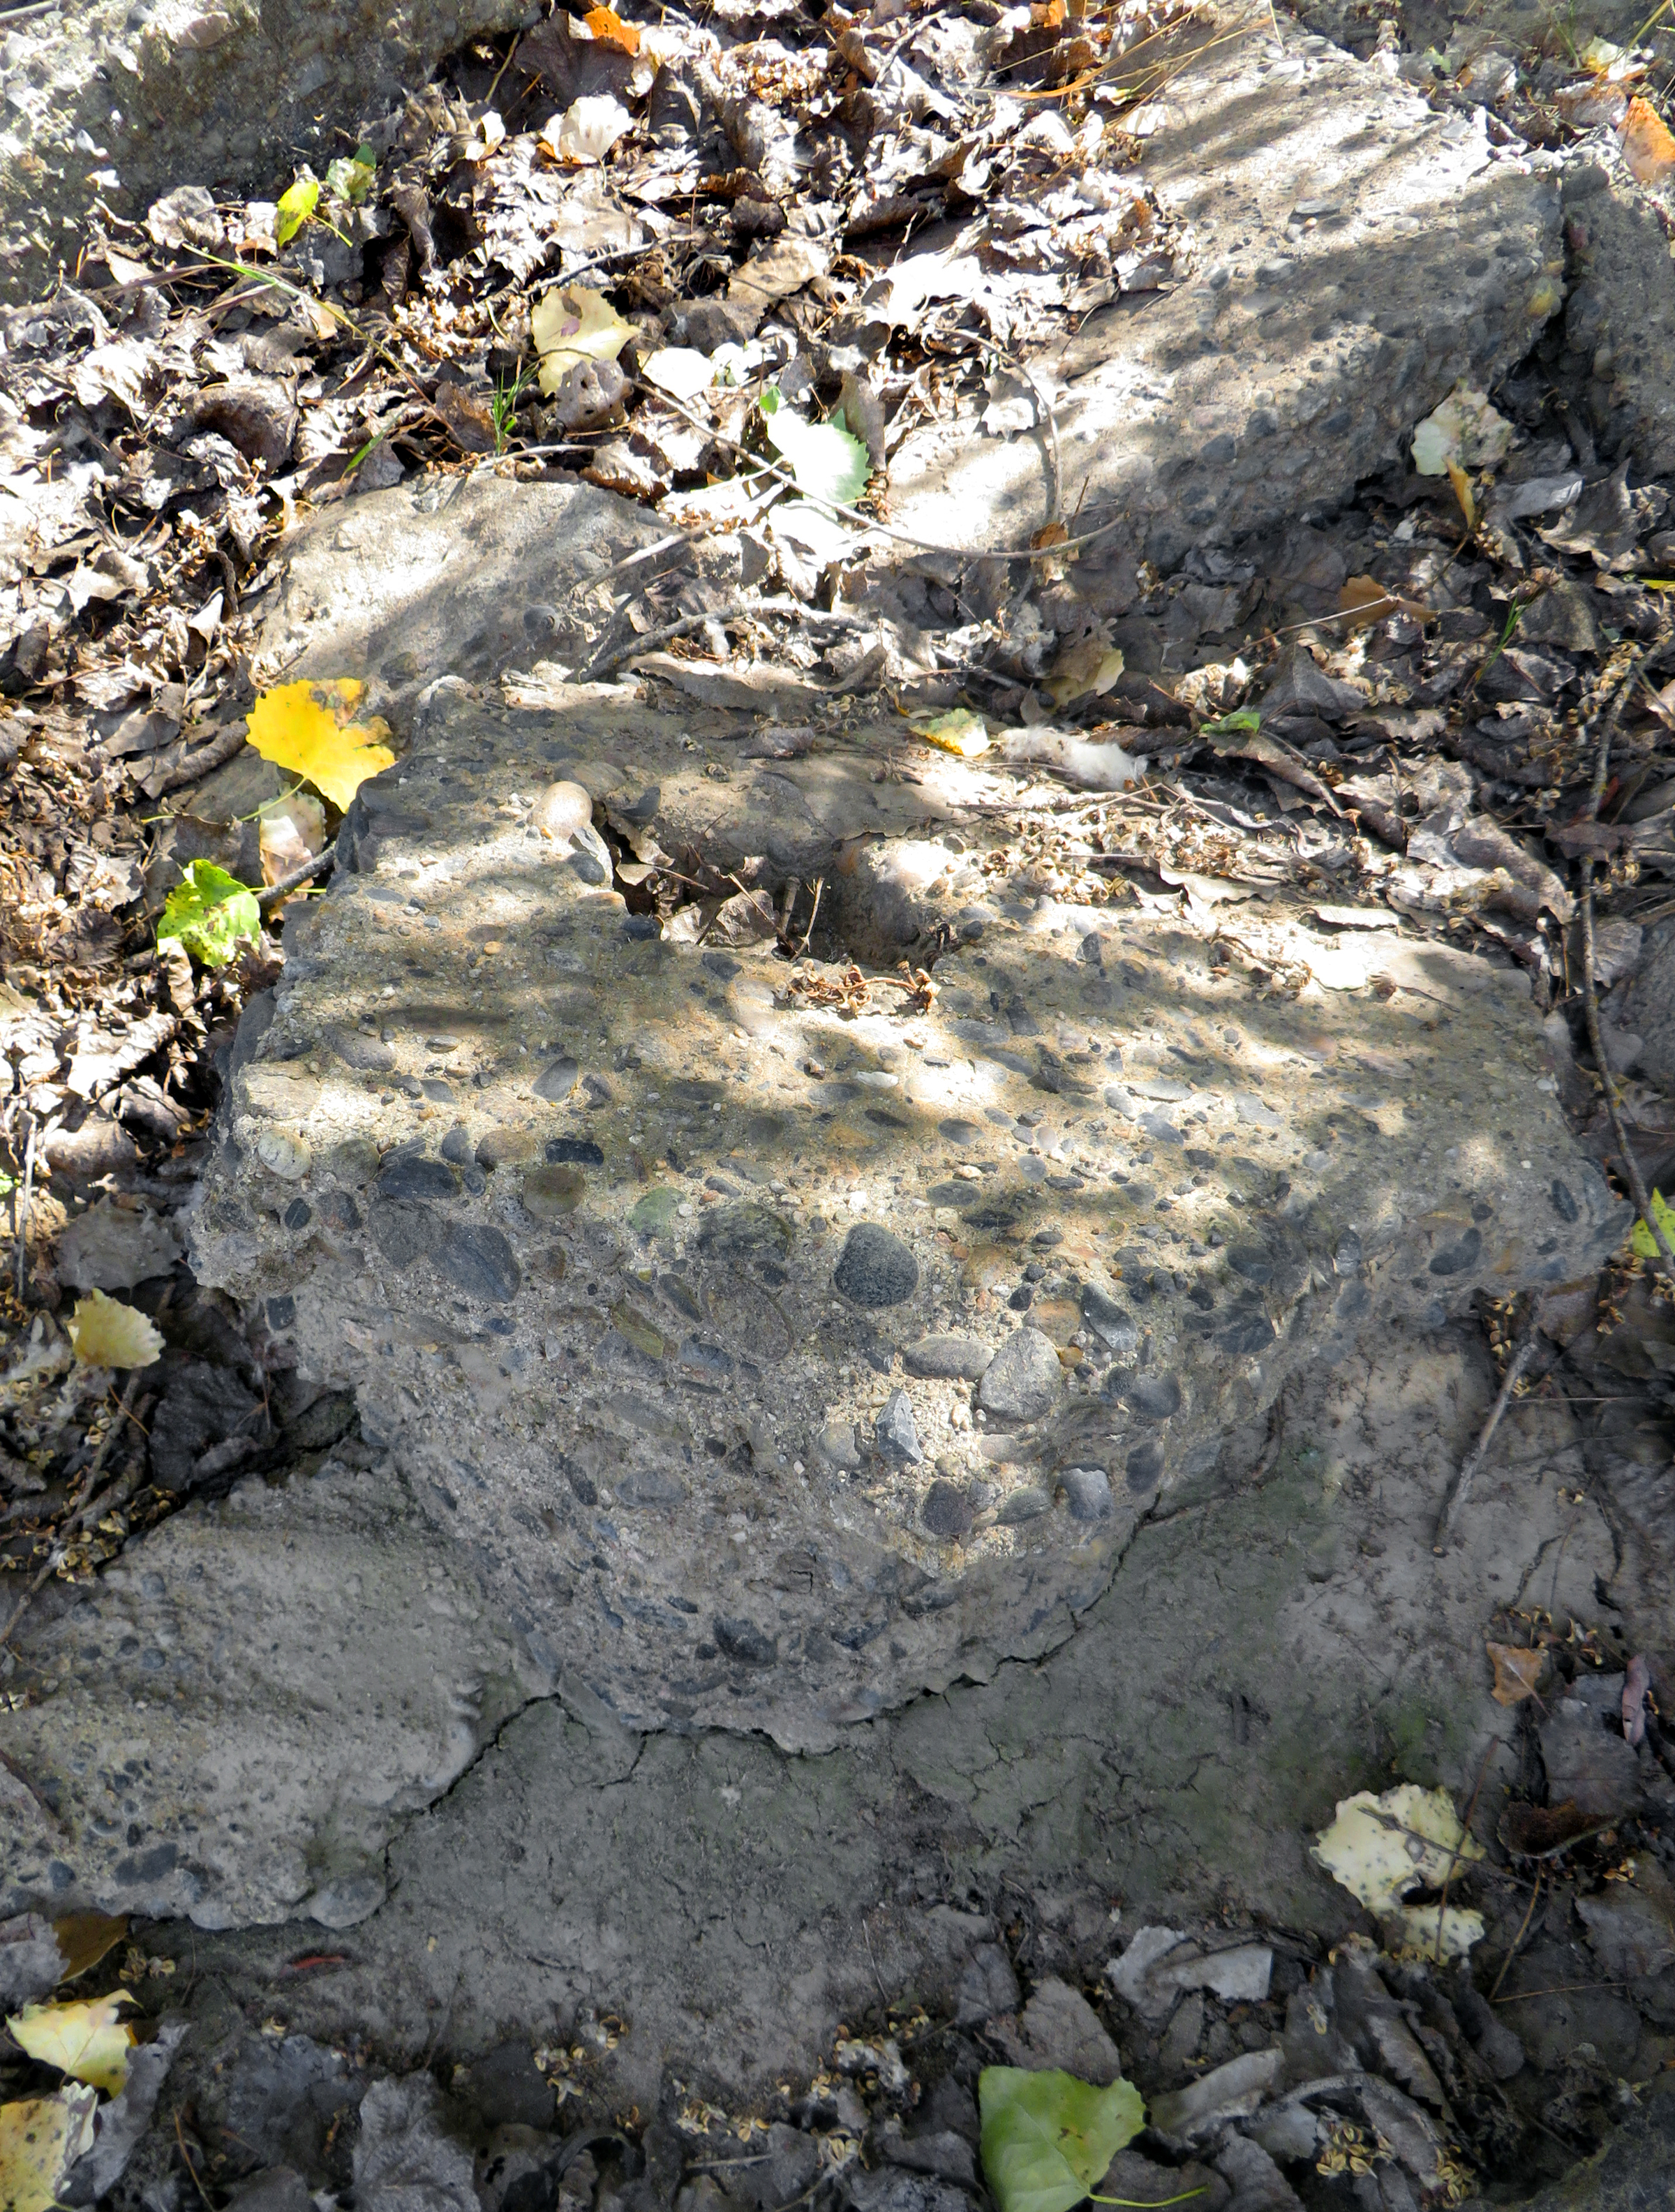 Concrete rubble on the south bank of Kings River, west of the Laton Bridge at Fowler Ave.